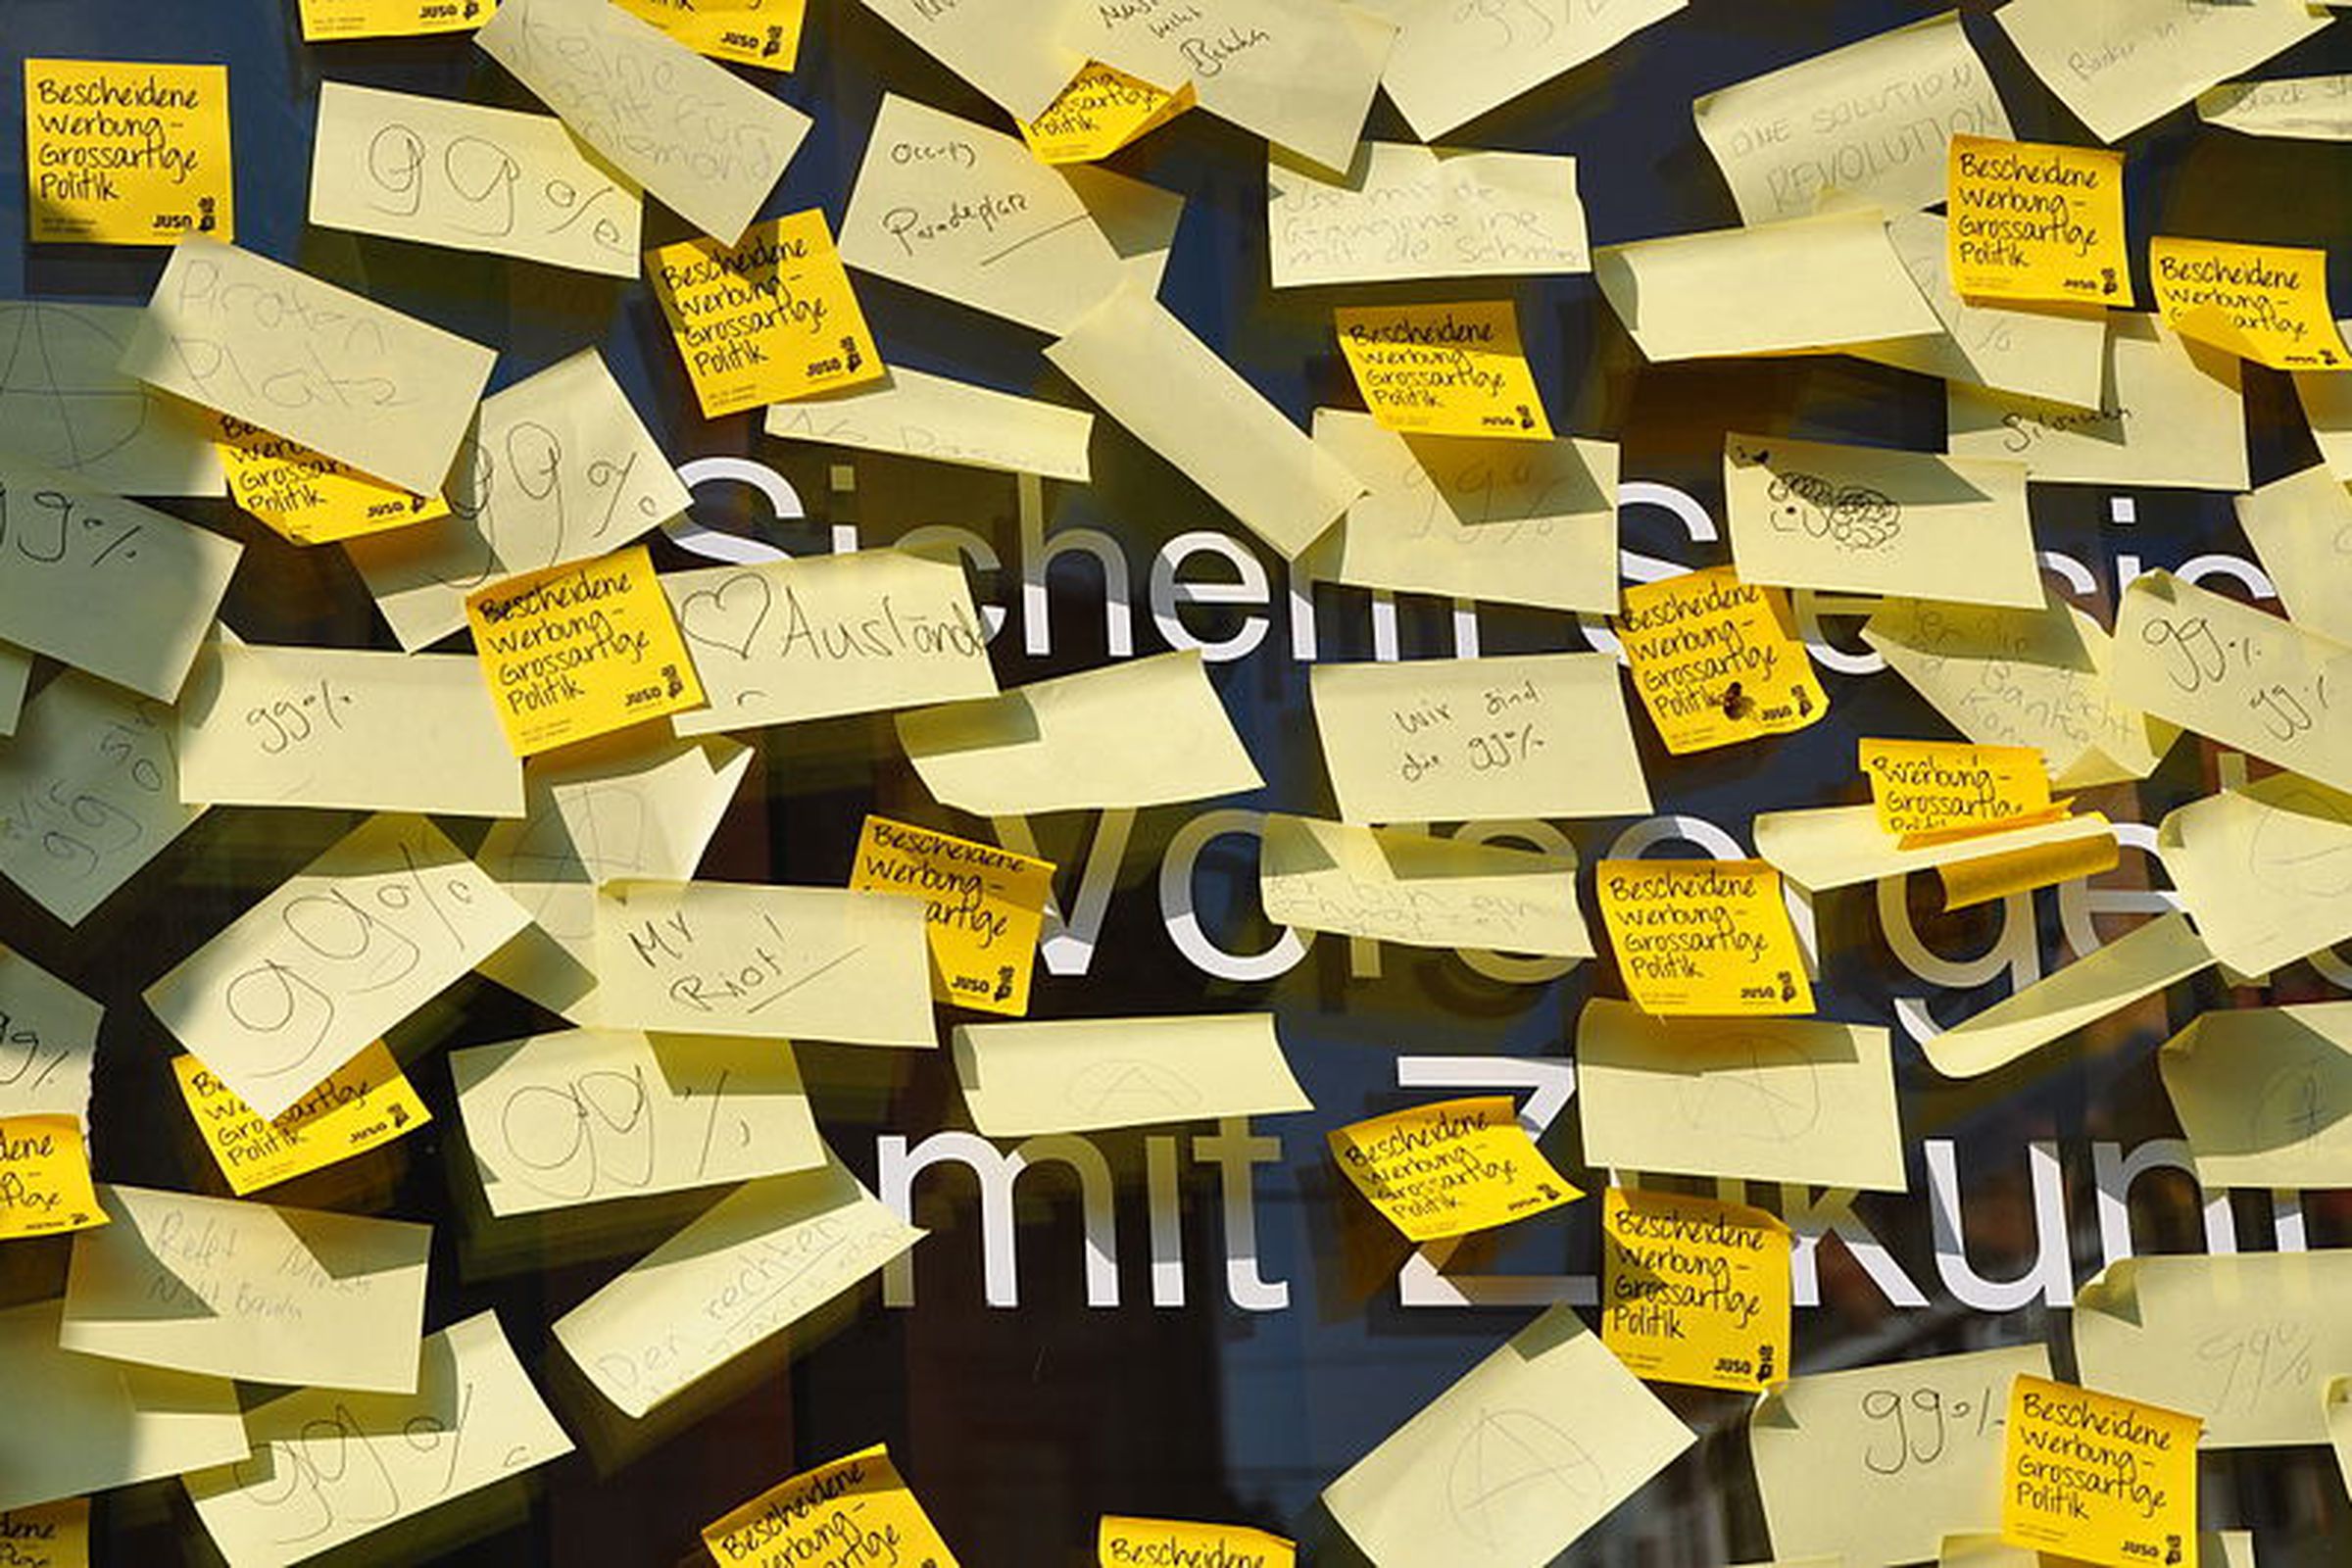 Post-it notes (Wikimedia Commons)